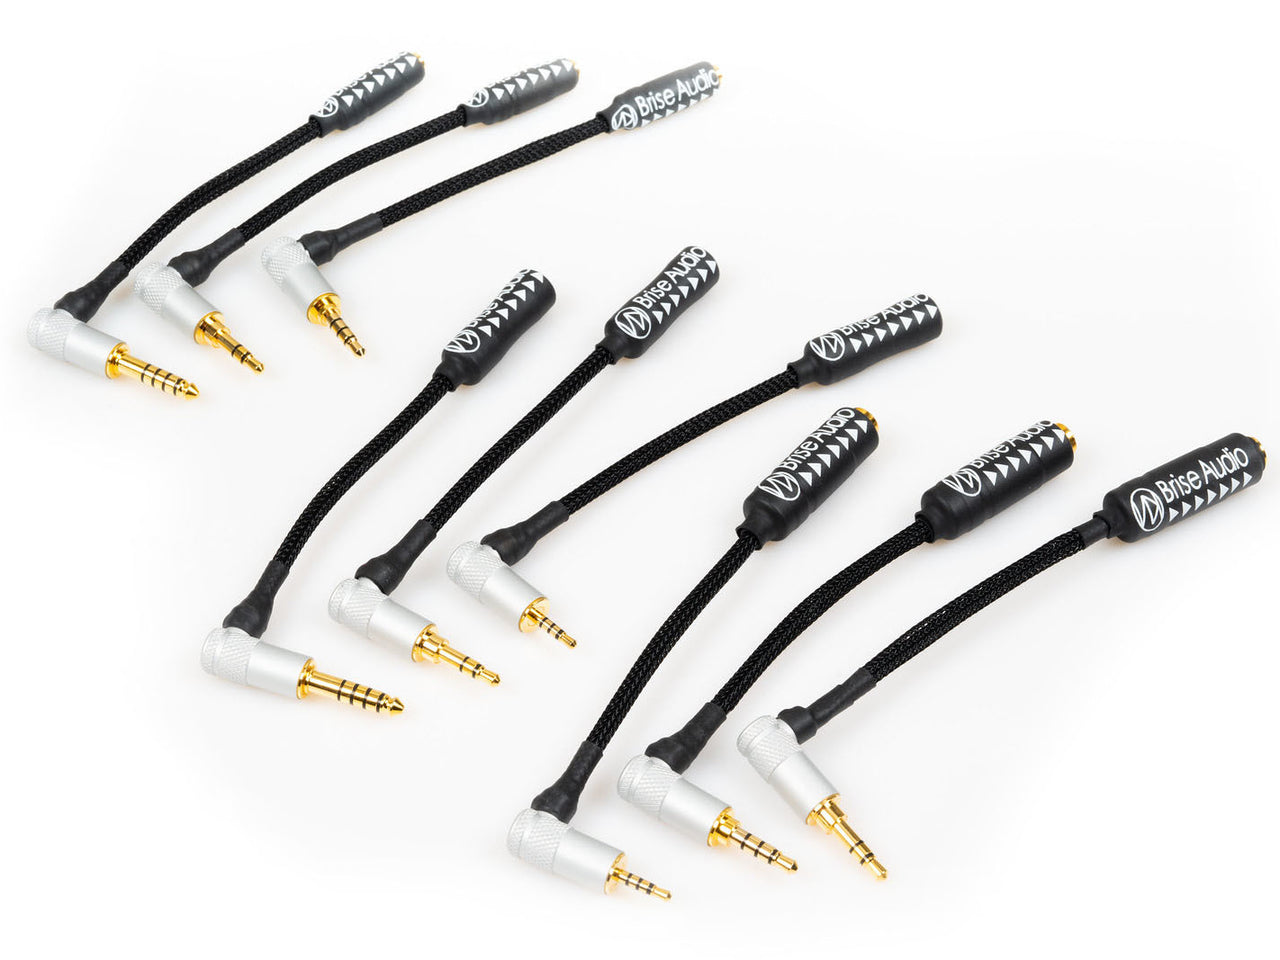 BriseAudio will release all 18 types of STR7-CONV As-Is conversion cables on August 27, 2021.